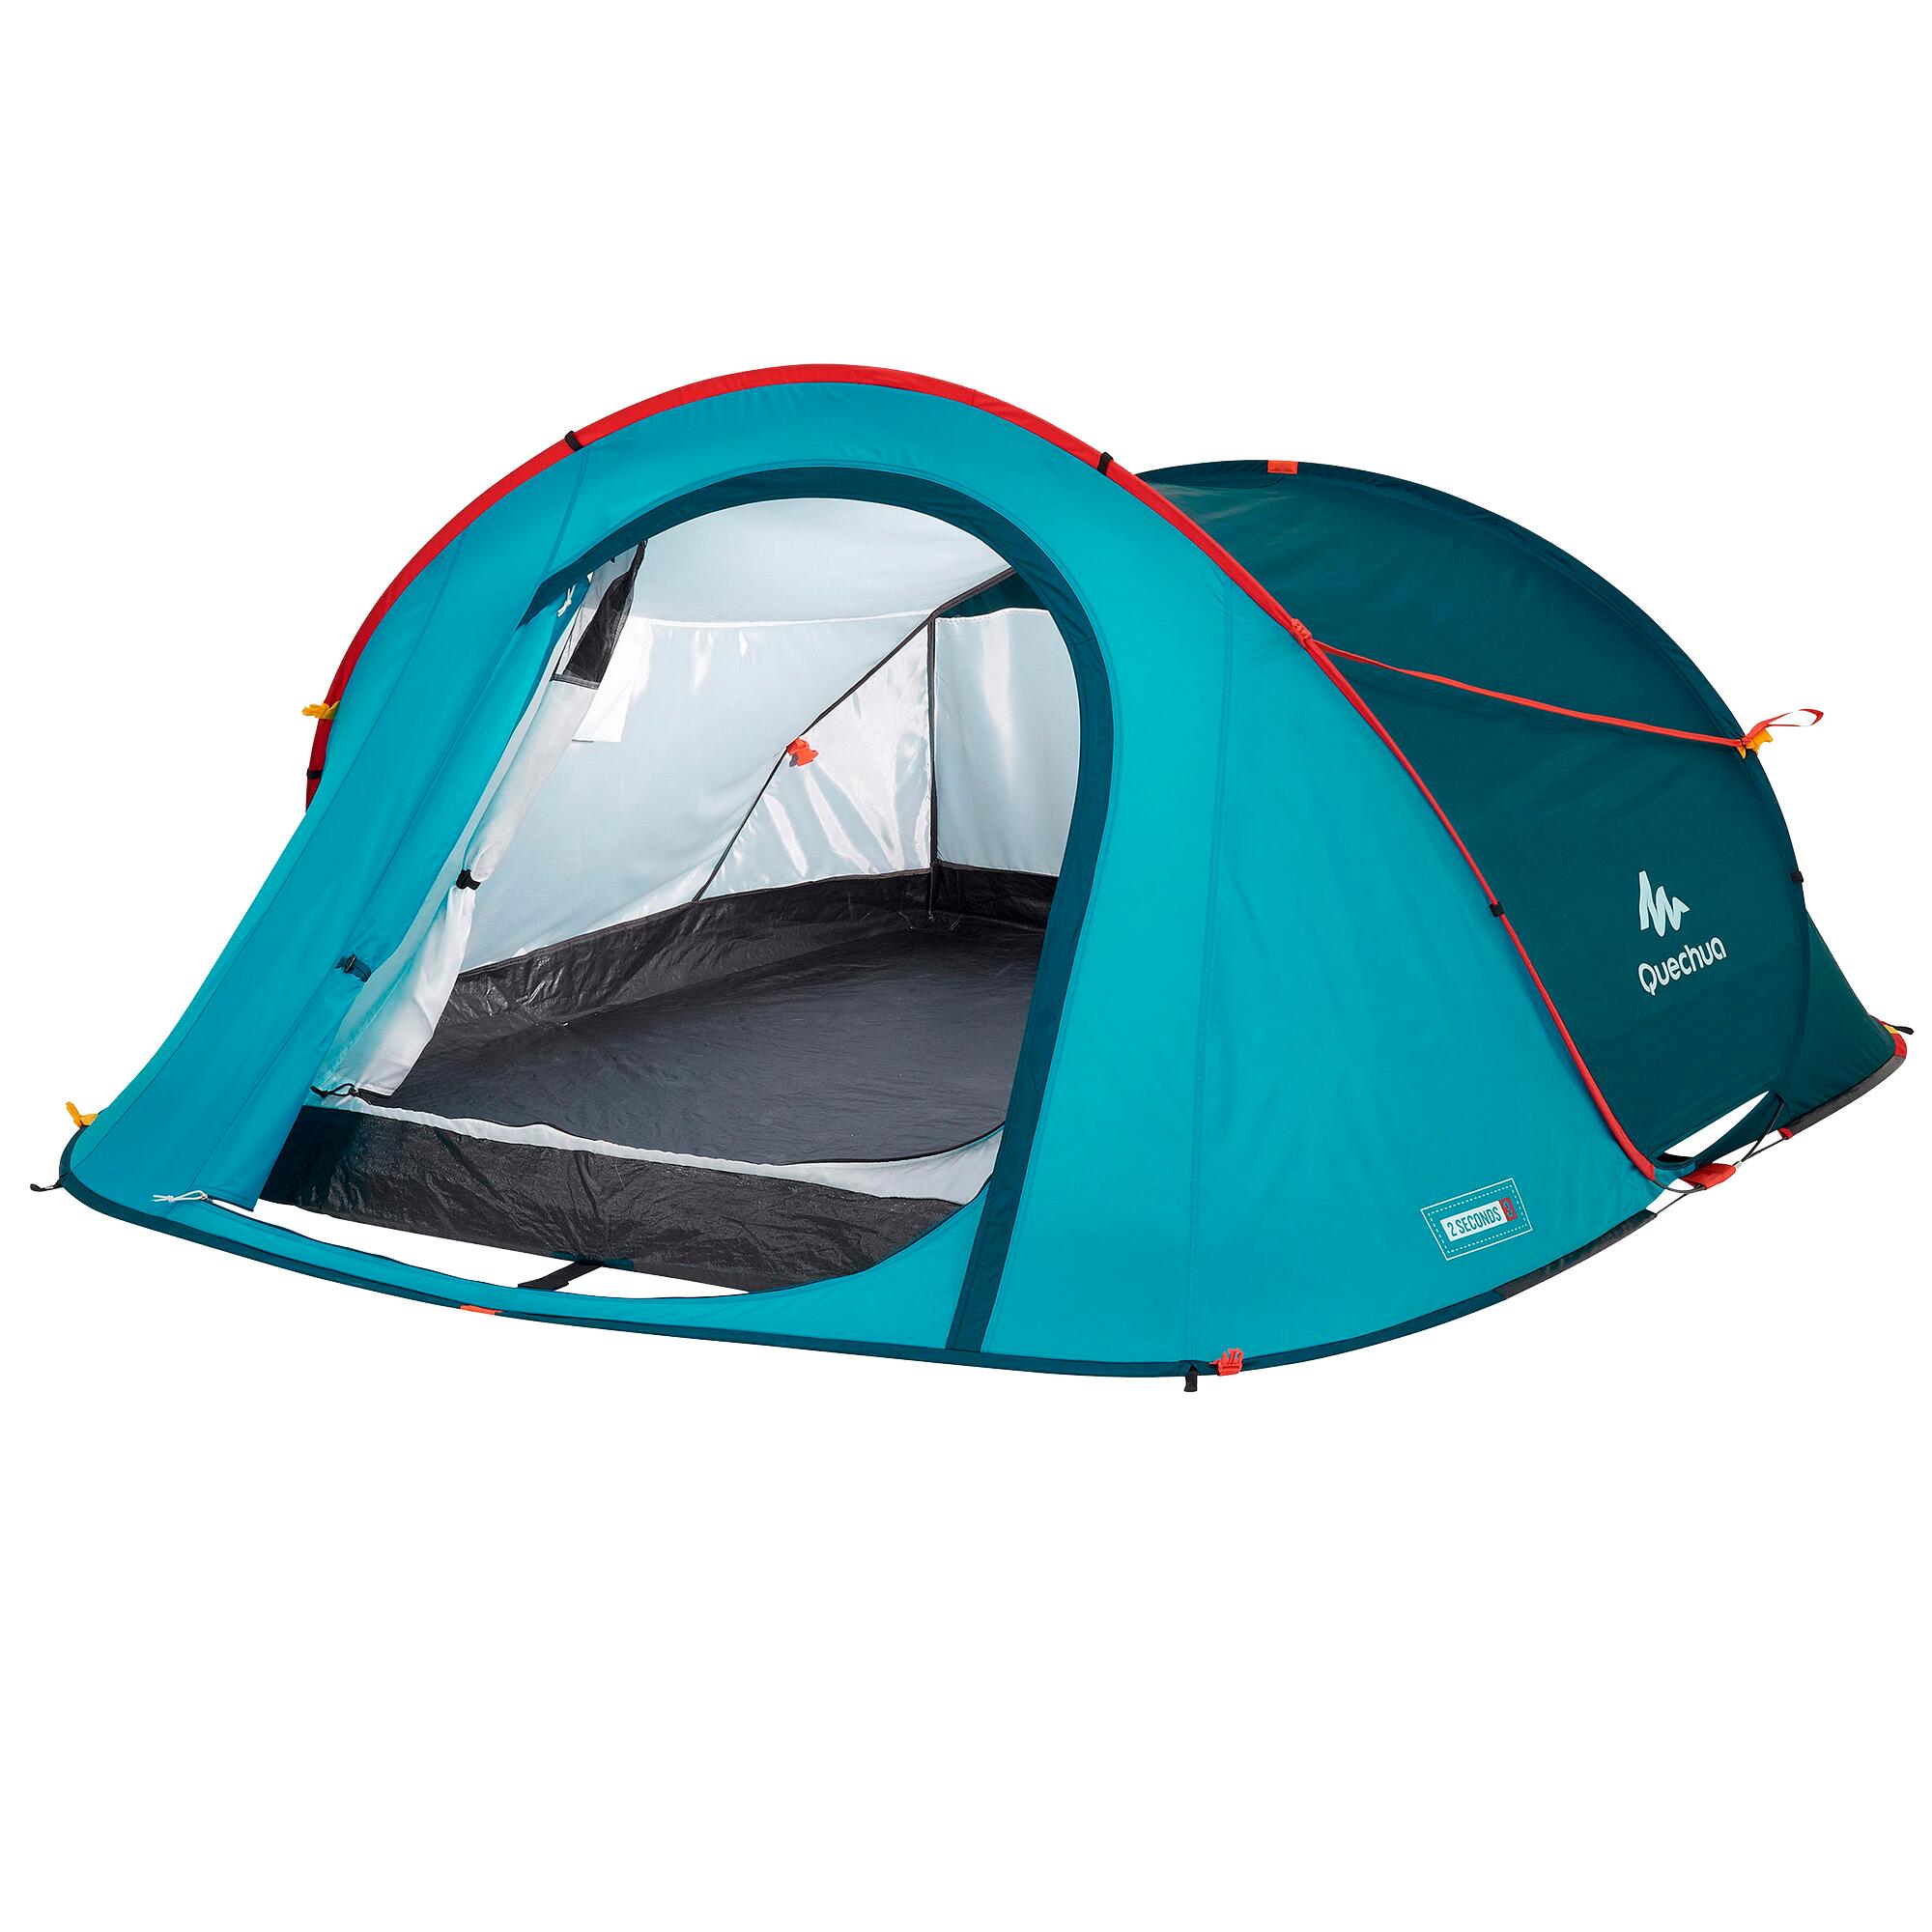 Camping tent - 2 SECONDS - 3-person 2/26